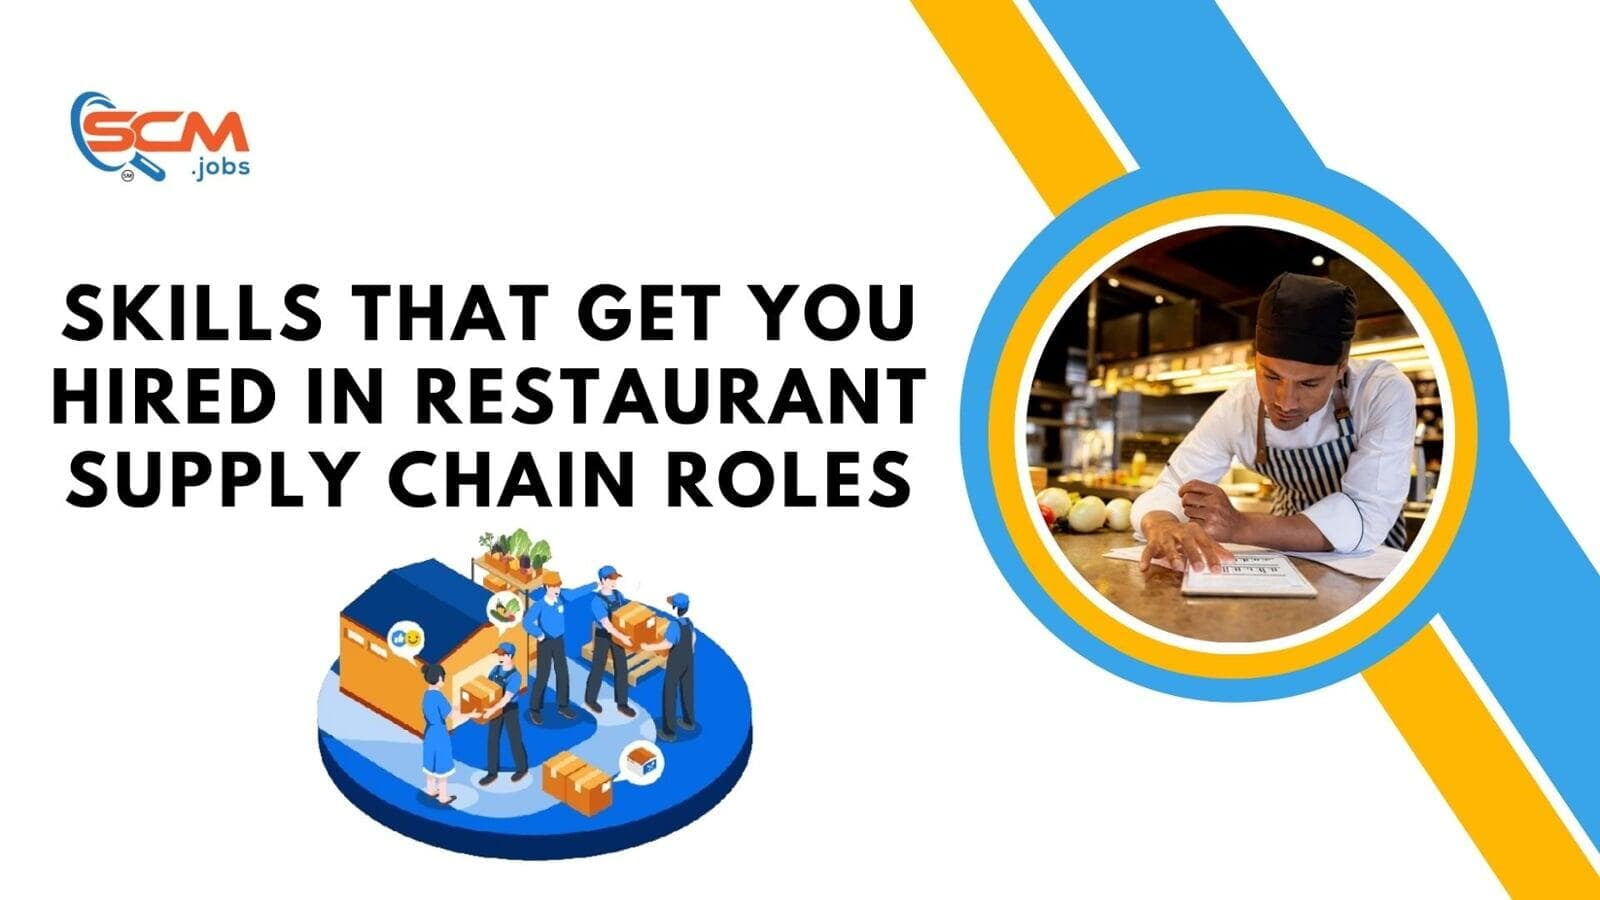 Skills That Get You Hired in Restaurant Supply Chain Roles